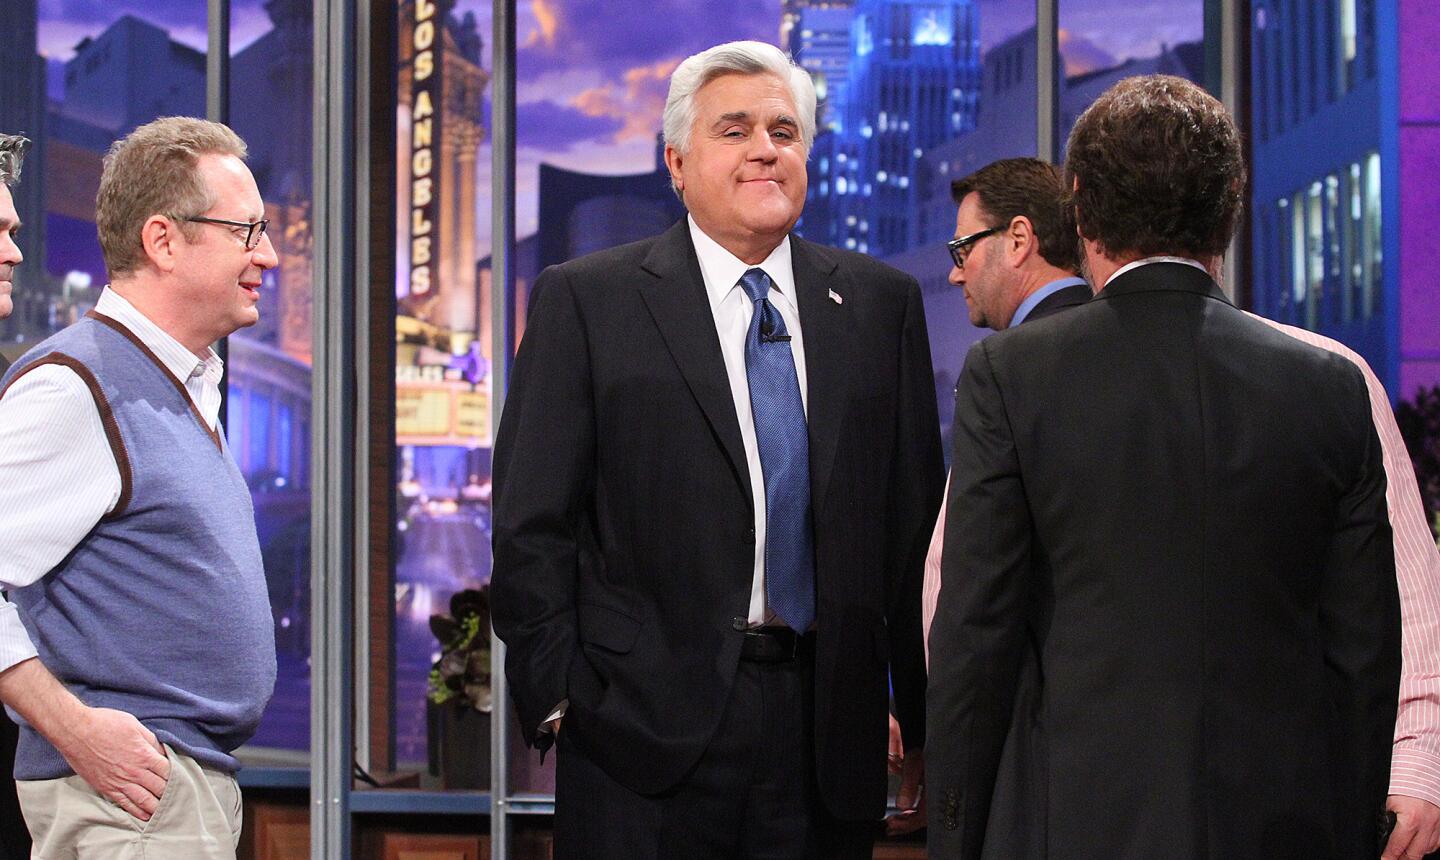 Jay Leno smiles for a moment during a commercial break standing at the center of a swirl of activity at the final recording of the Tonight Show with Jay Leno in Burbank at Burbank Studios on Thursday, February 6, 2014. Jay Leno ended a 22 year run as the host of the Tonight Show which now will be hosted by Jimmy Fallon.